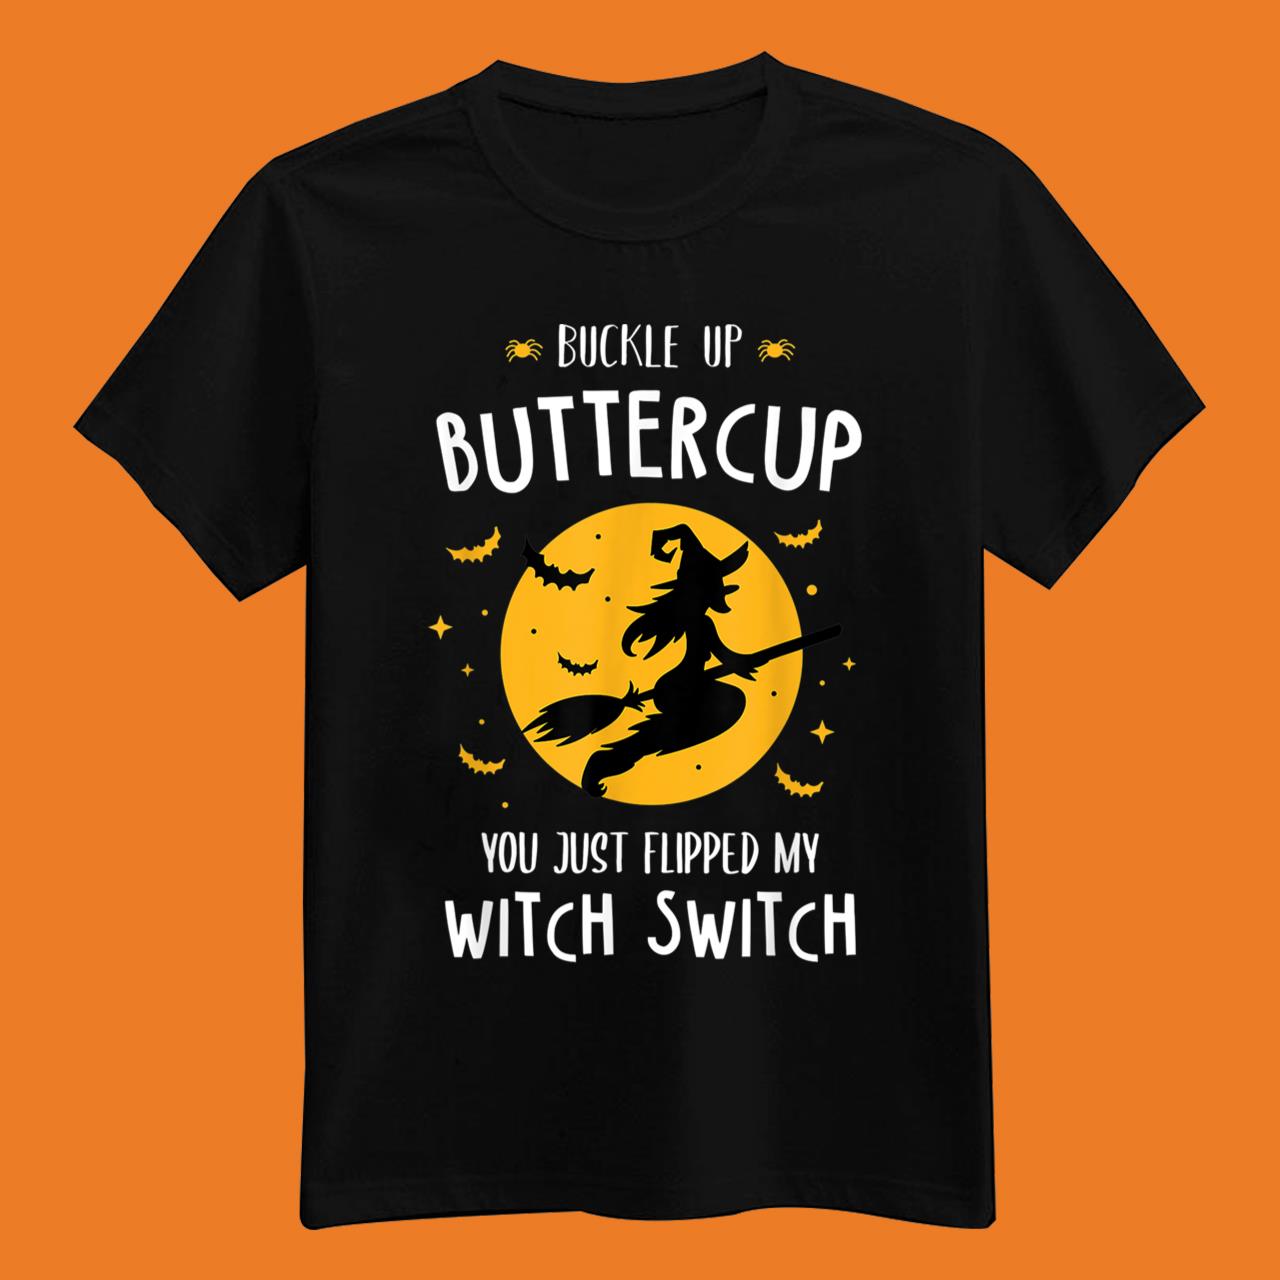 Buckle Up Buttercup You Just Flipped My Witch Switch Halloween T-Shirt